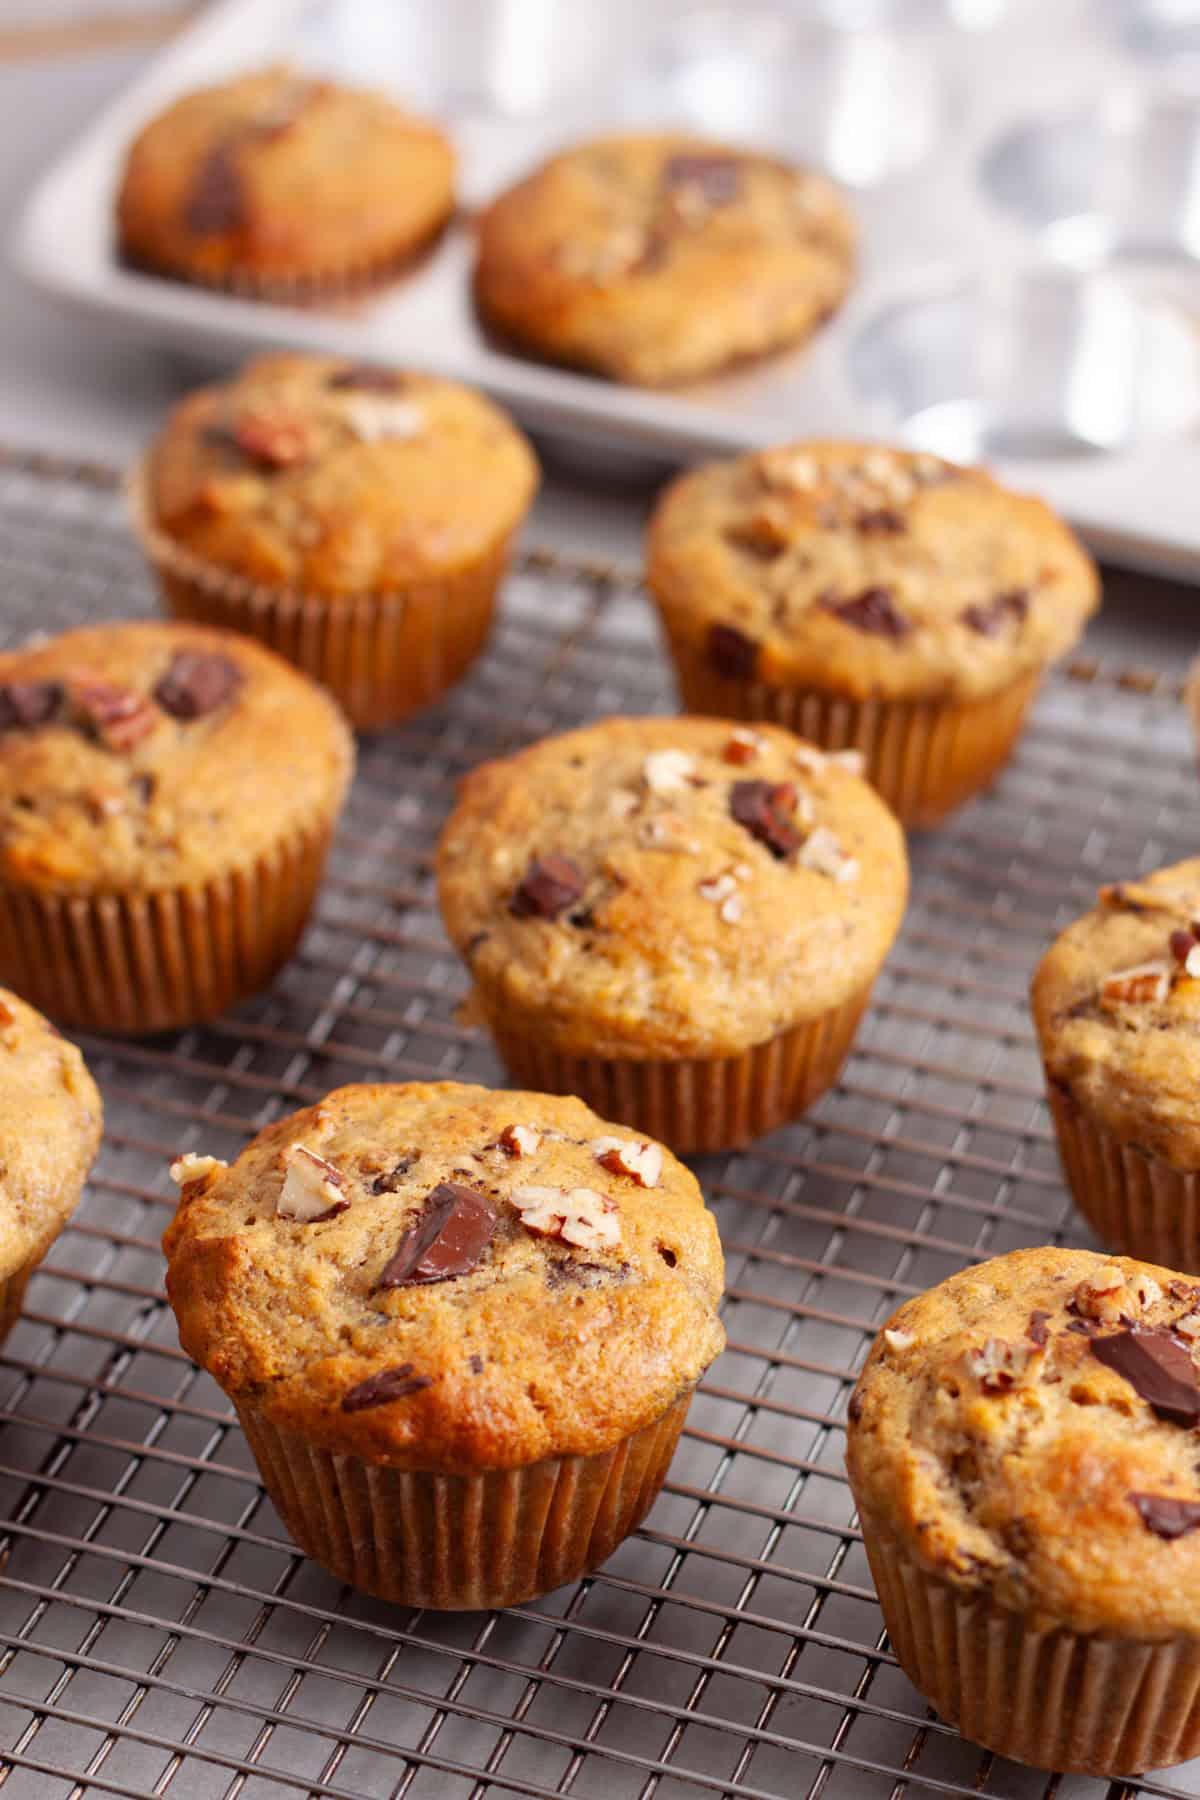 Chocolate chip banana muffins cooling on a wire rack on a gray table.